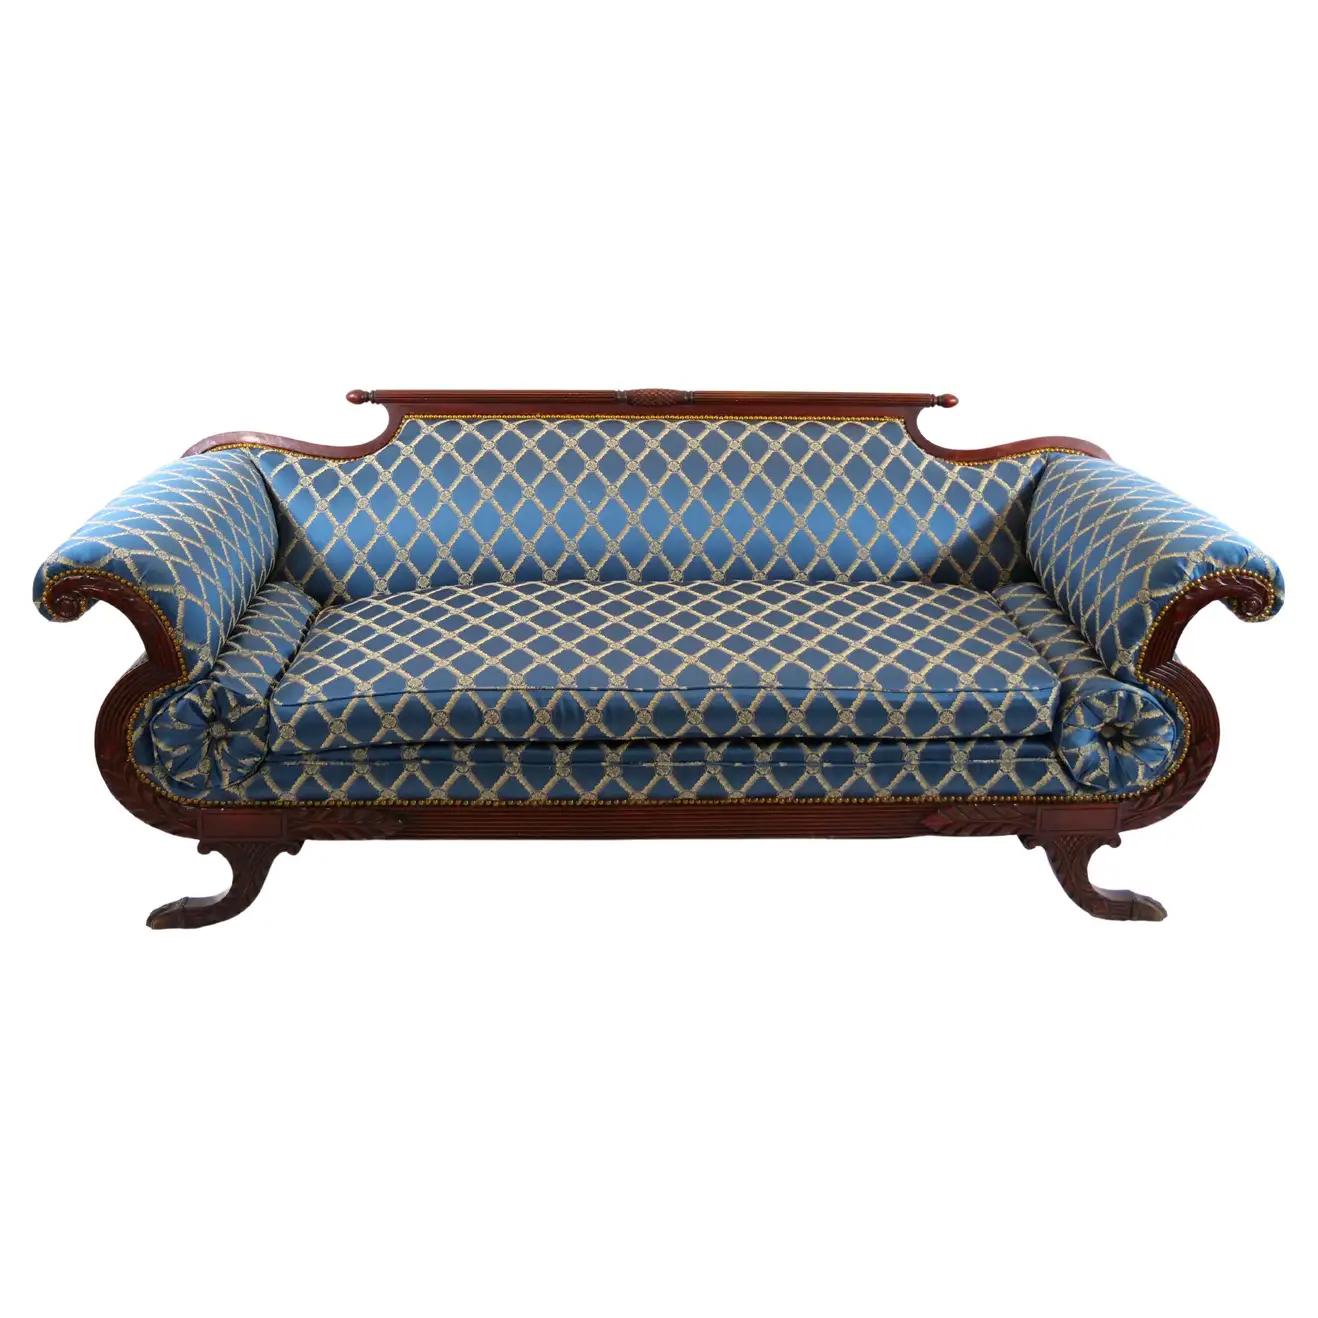 19th Century Empire Style Mahogany Framed Upholstered Sofa For Sale 4